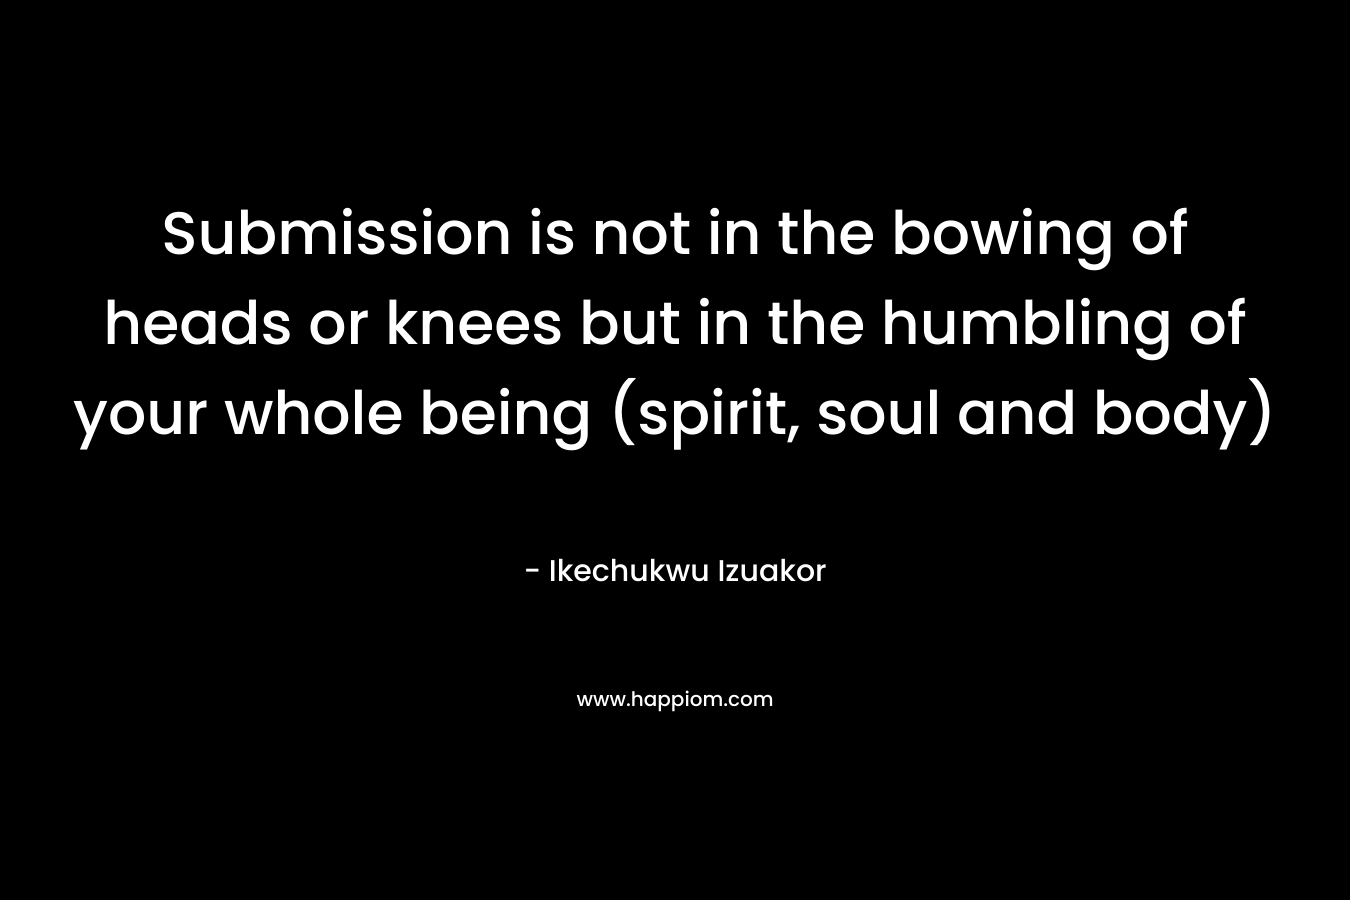 Submission is not in the bowing of heads or knees but in the humbling of your whole being (spirit, soul and body) – Ikechukwu Izuakor